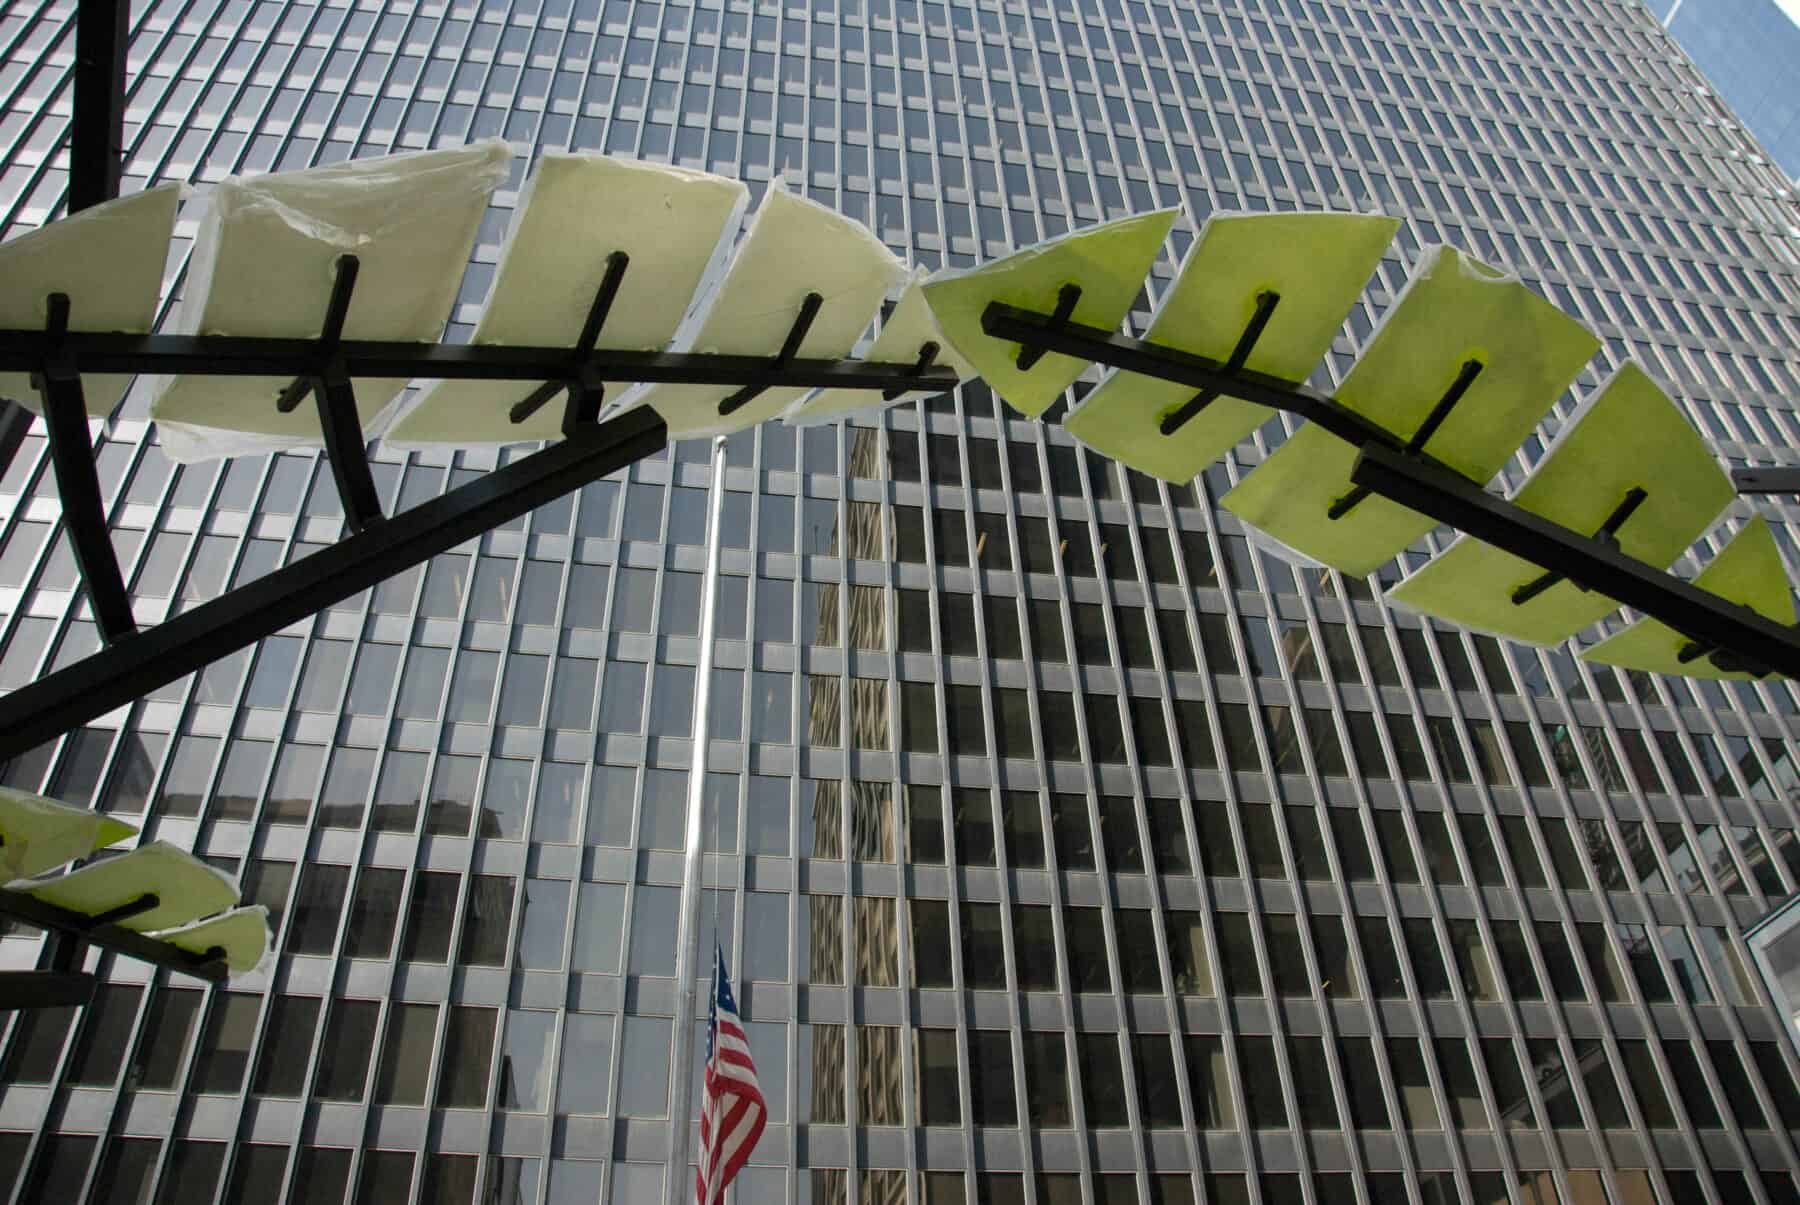 Custom Fabrication of Architectural Acrylic Tree Leaves with Metal Branches from Construction Specialty Projects by Commercial Builder & General Contractor Structural Enterprises